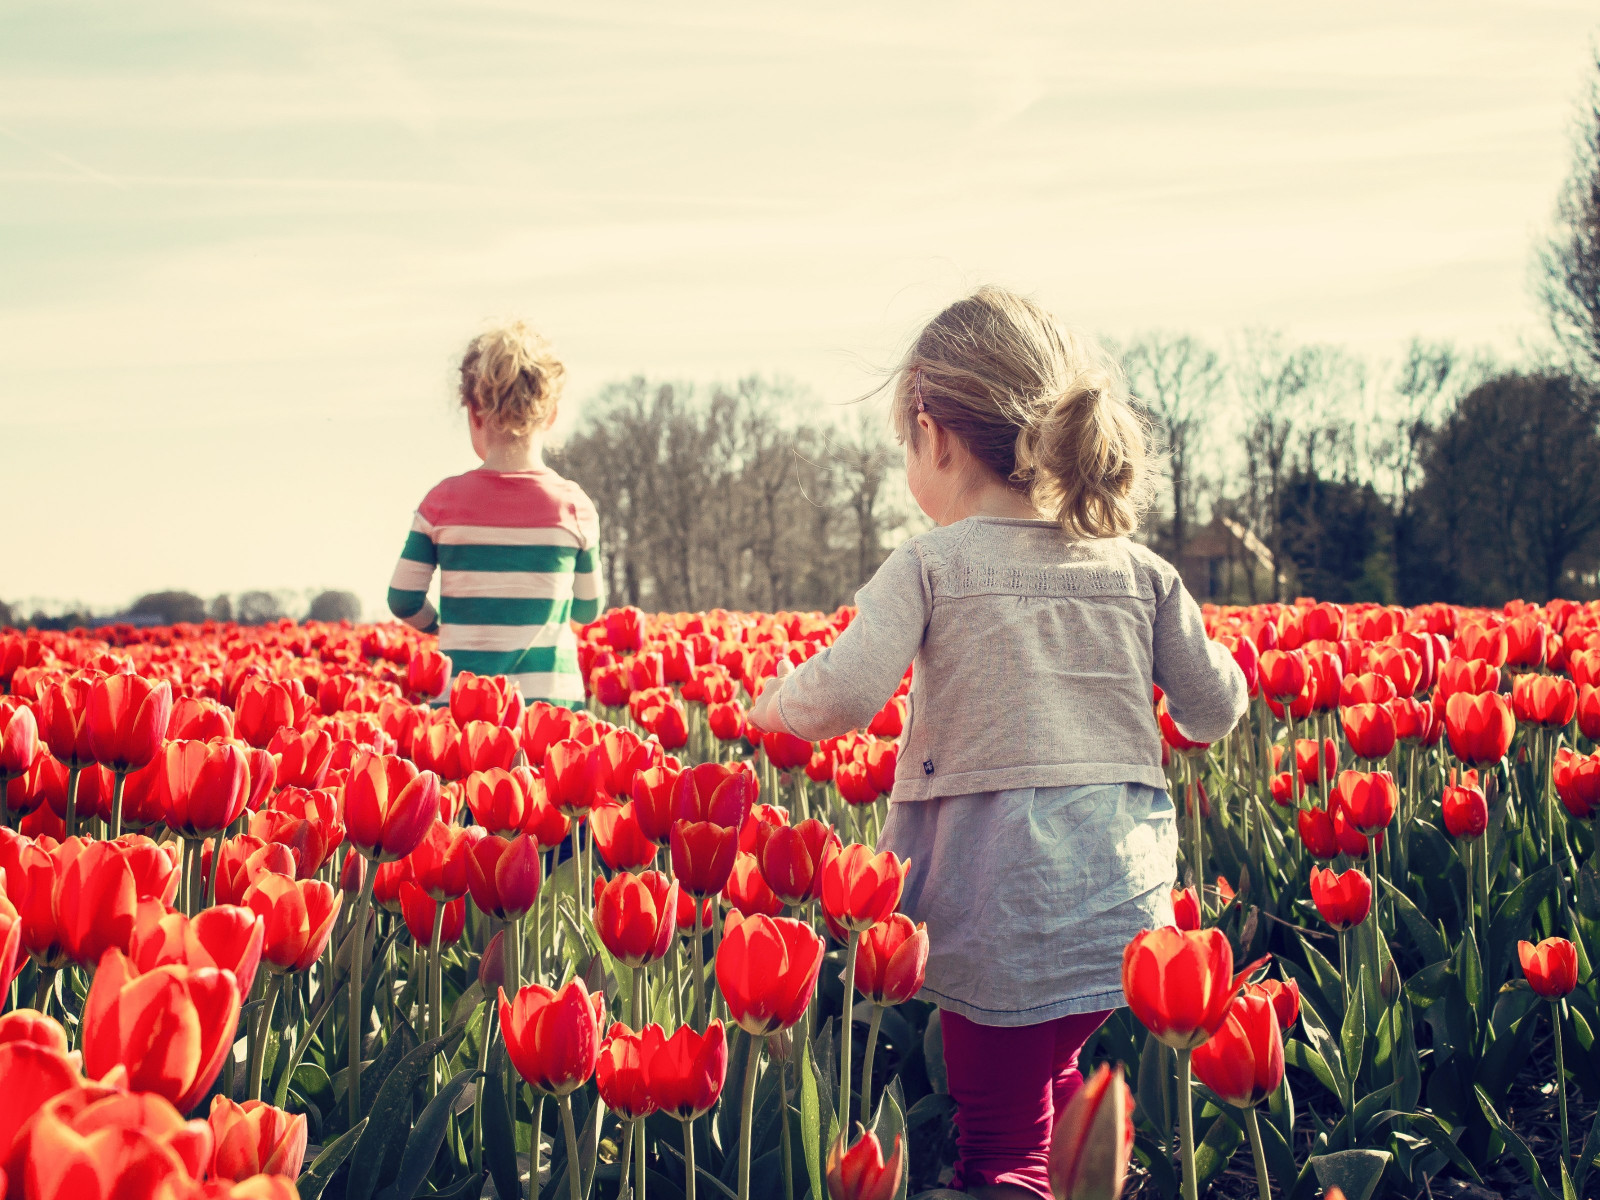 Children in the land with tulips wallpaper 1600x1200